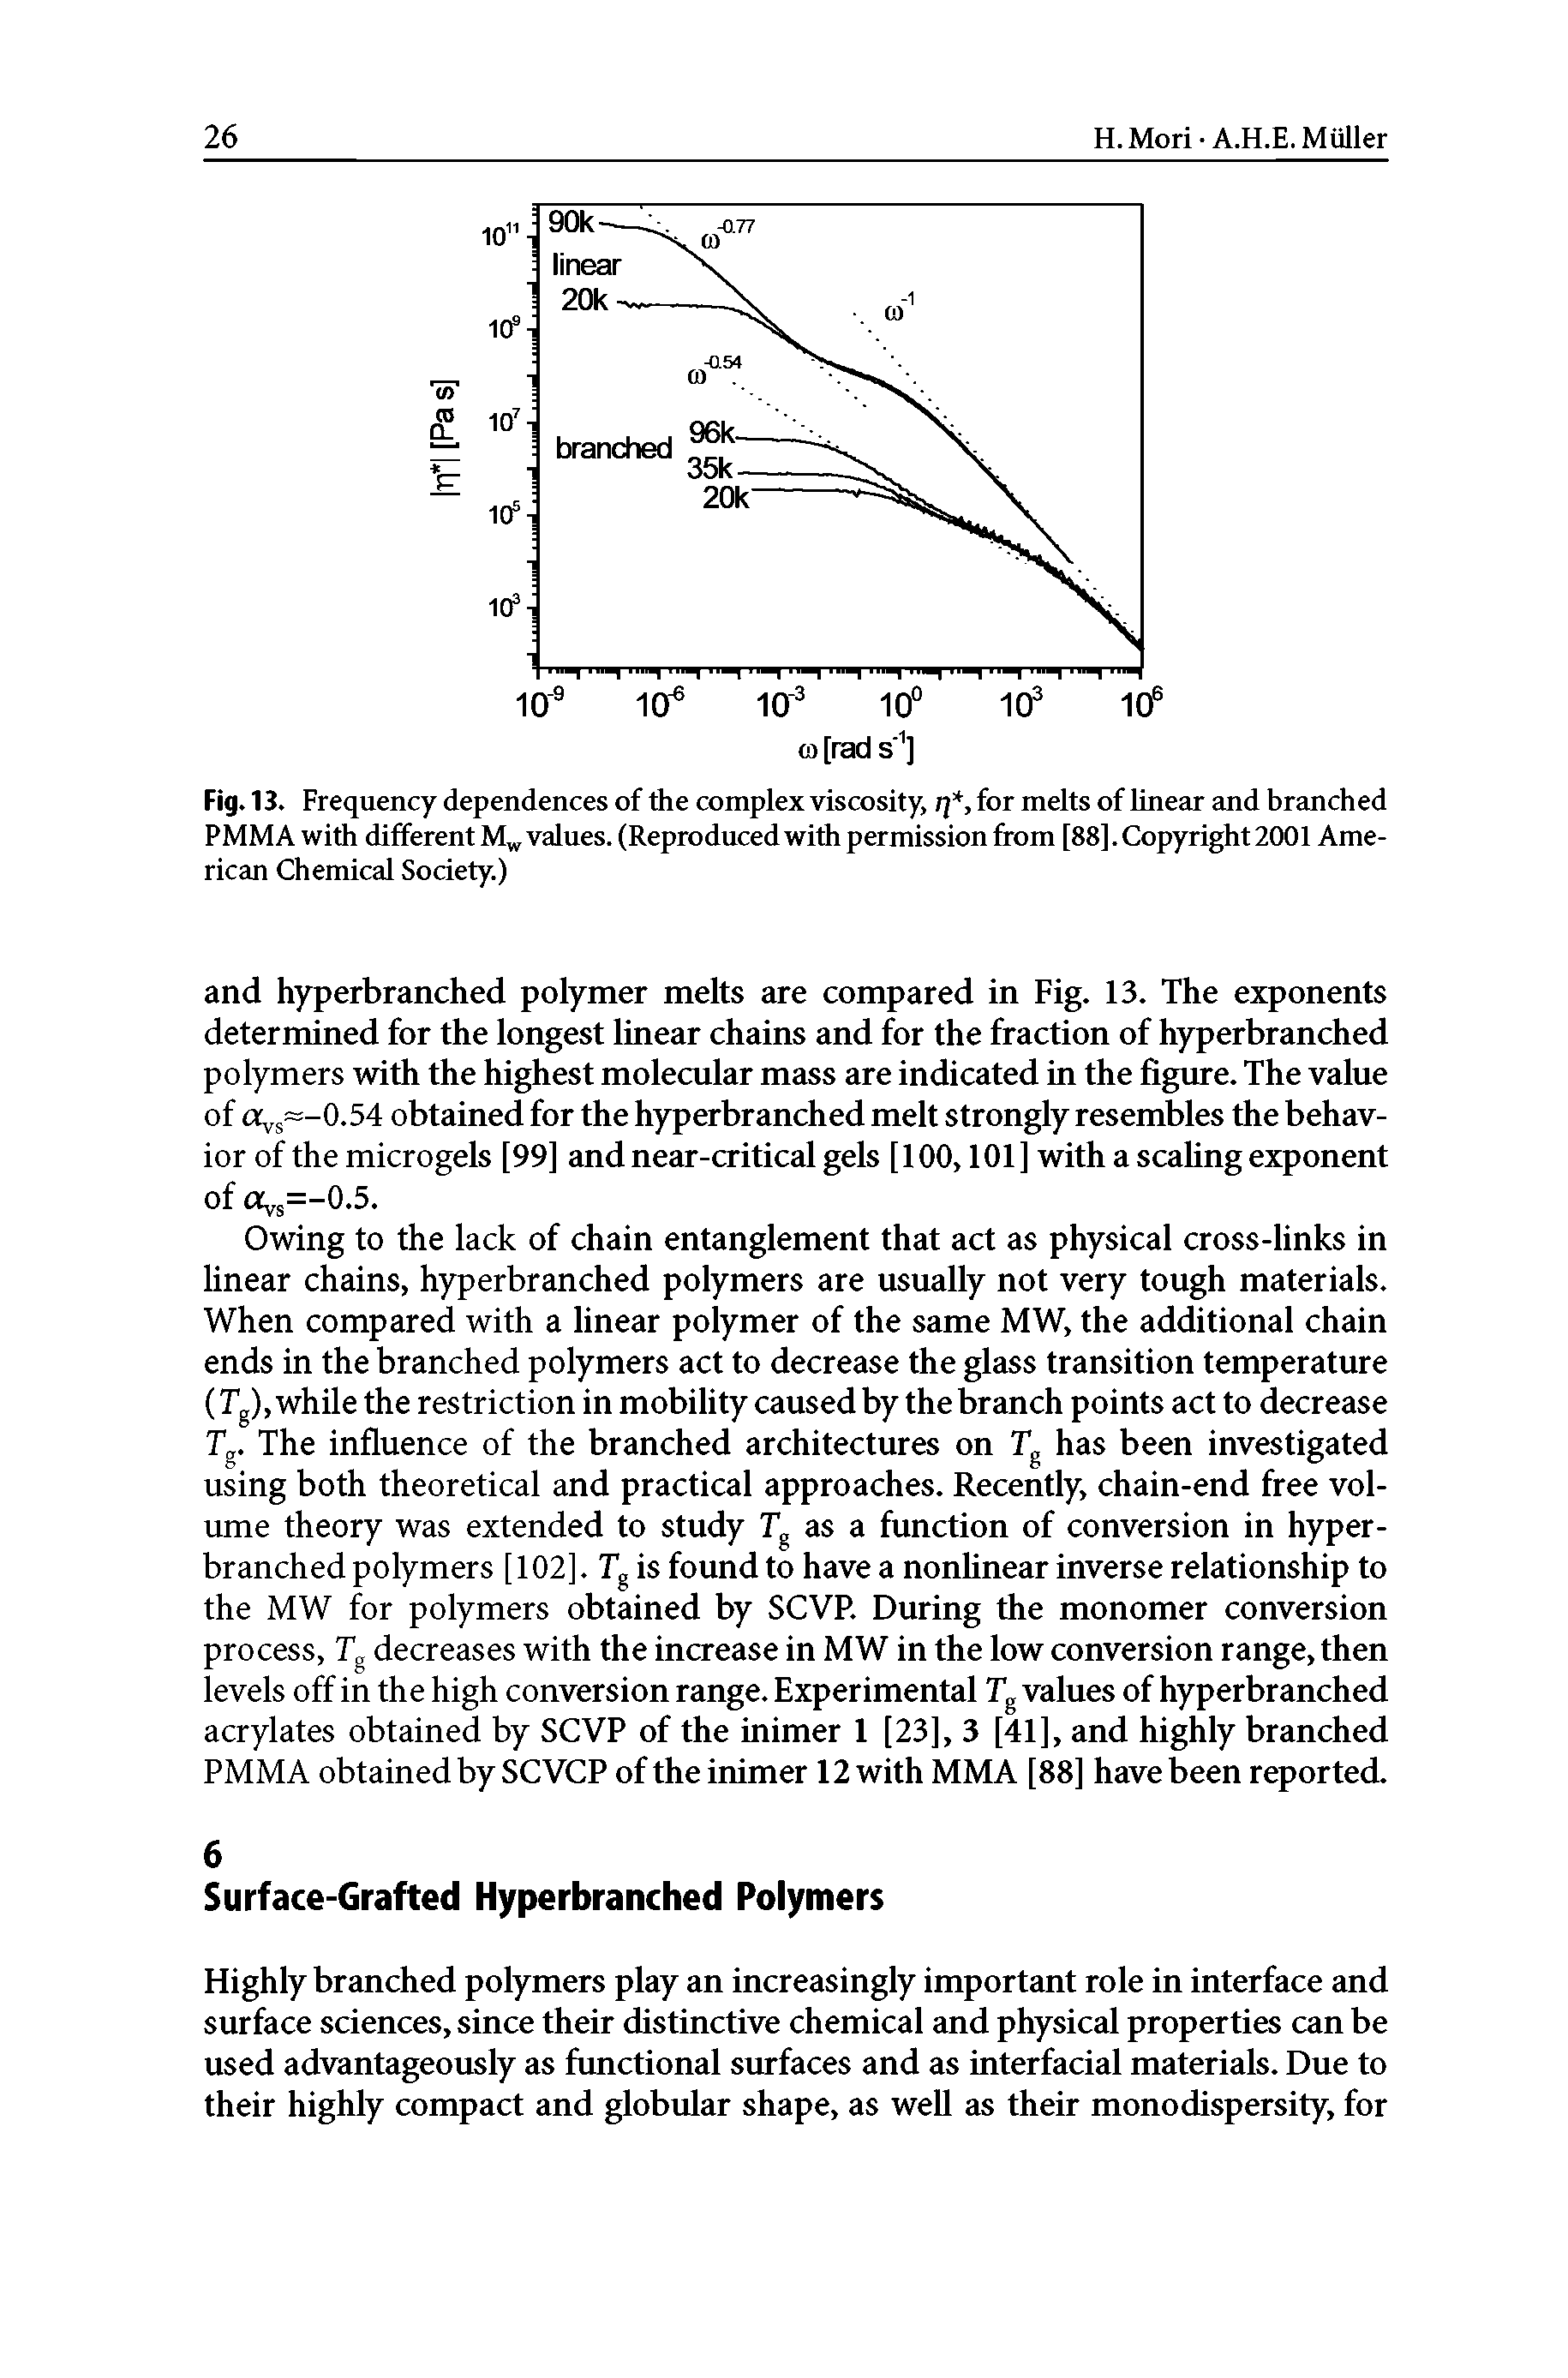 Fig. 13. Frequency dependences of the complex viscosity, q, for melts of linear and branched PMM A with different M values. (Reproduced with permission from [88]. Copyright 2001 American Chemical Society.)...